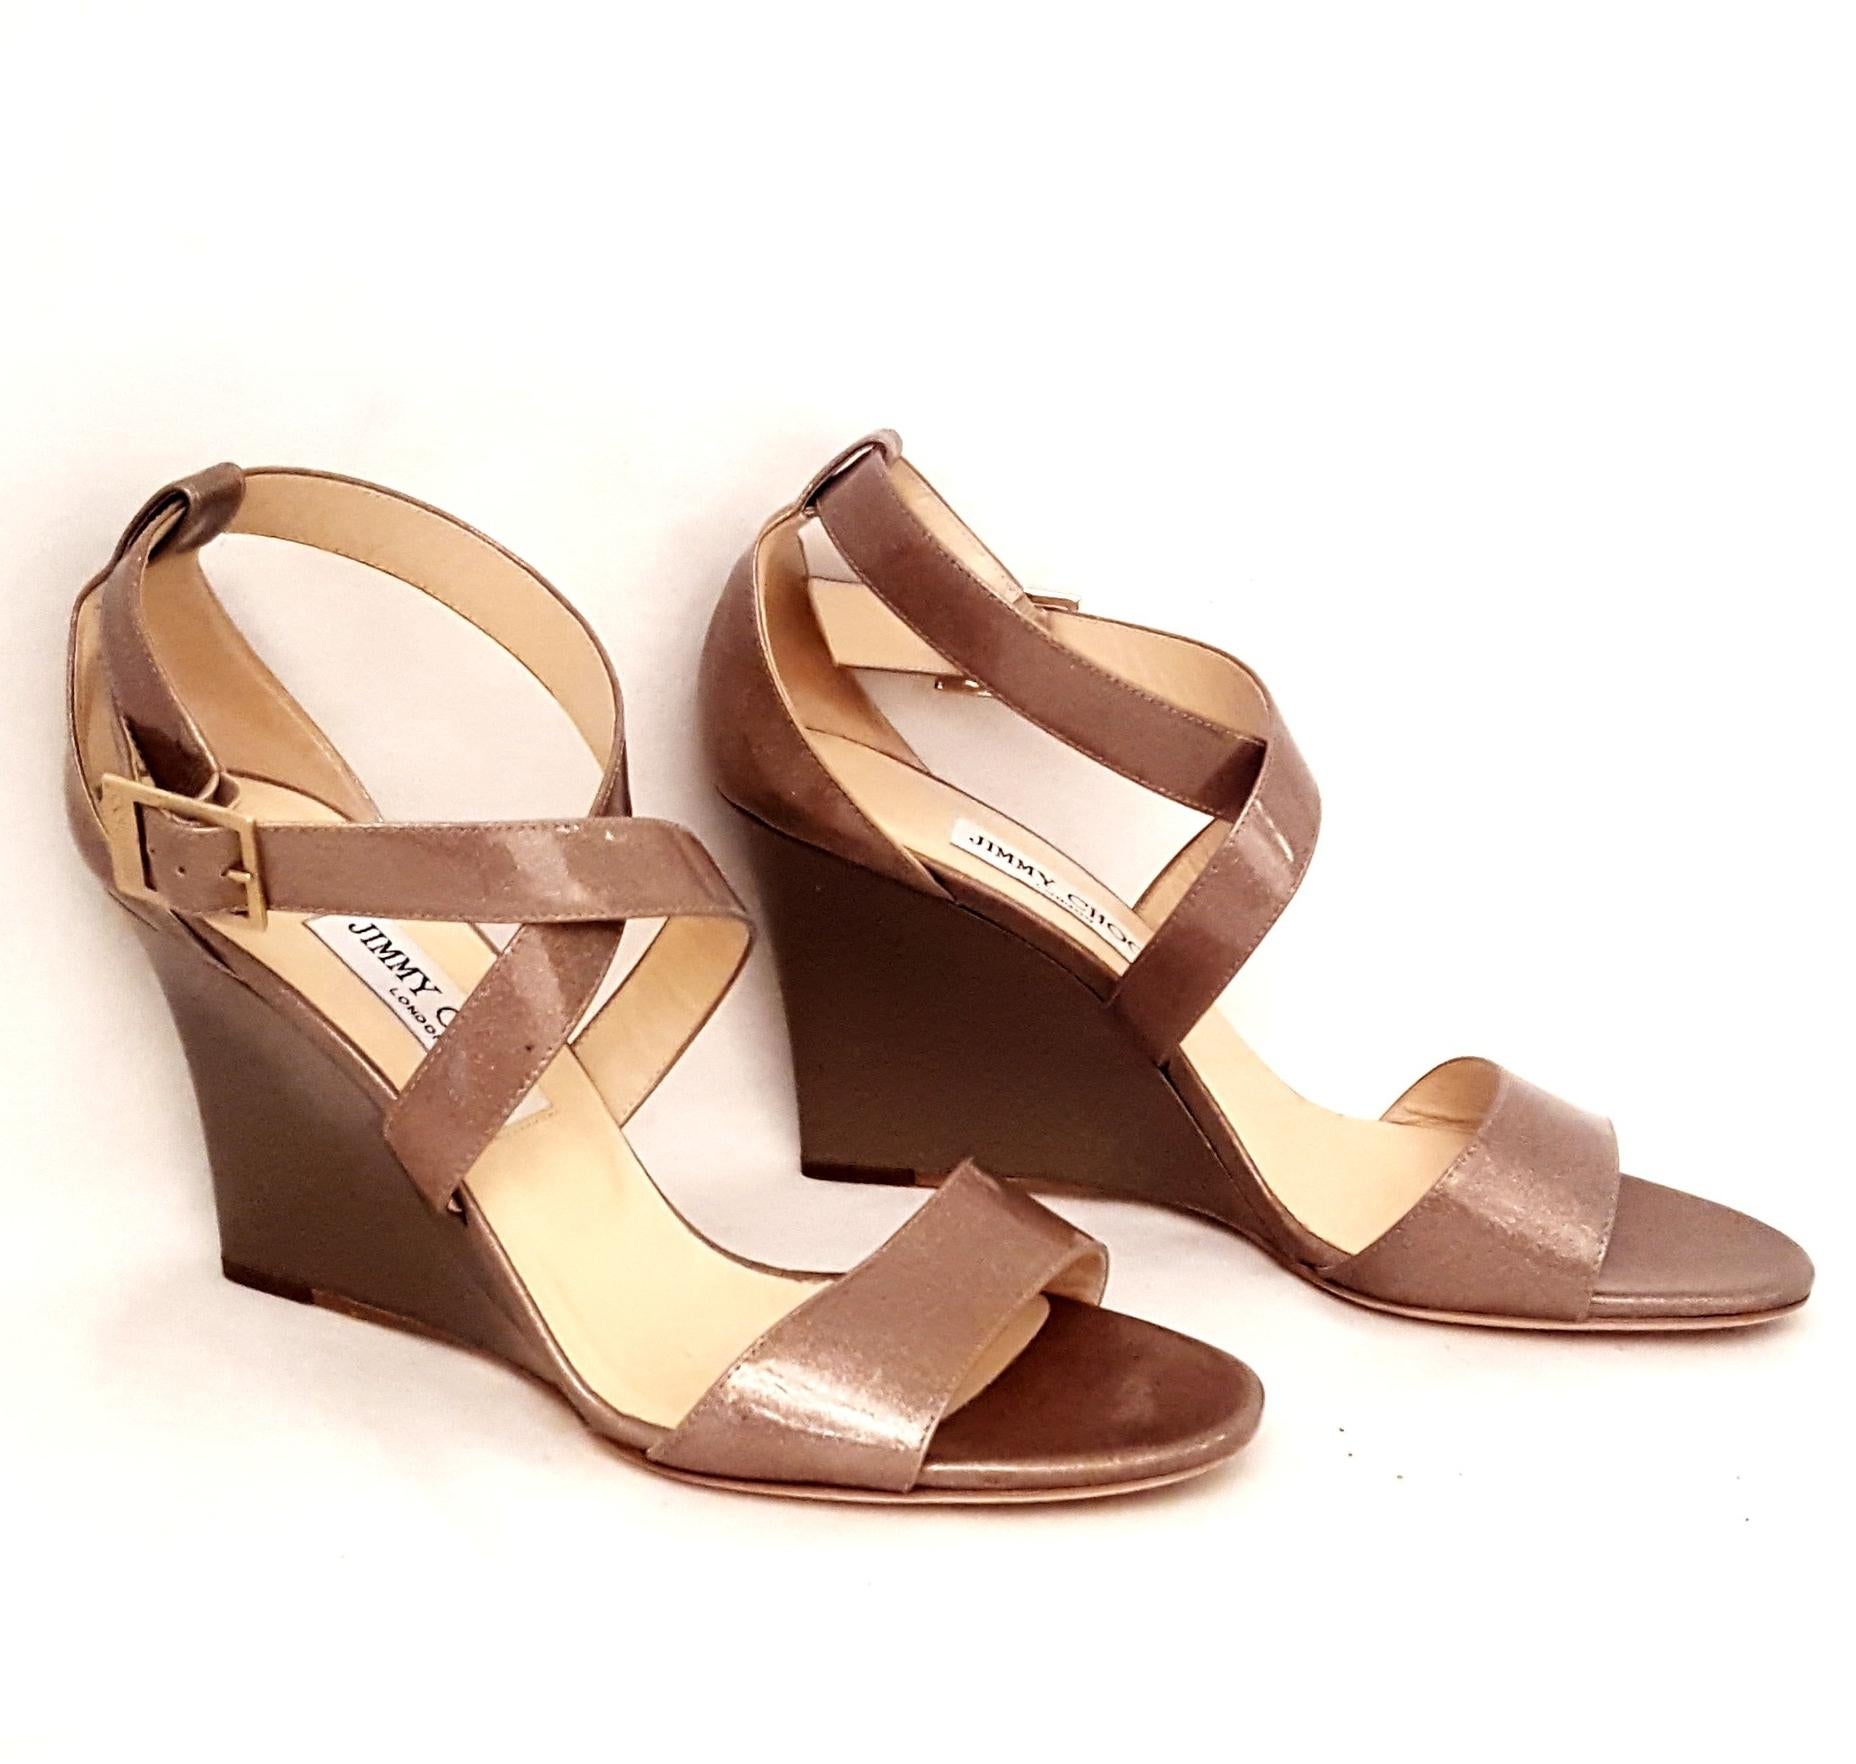 Beige Jimmy Choo Fearne Taupe Patent Leather Glitter & Criss Cross Straps Wedges